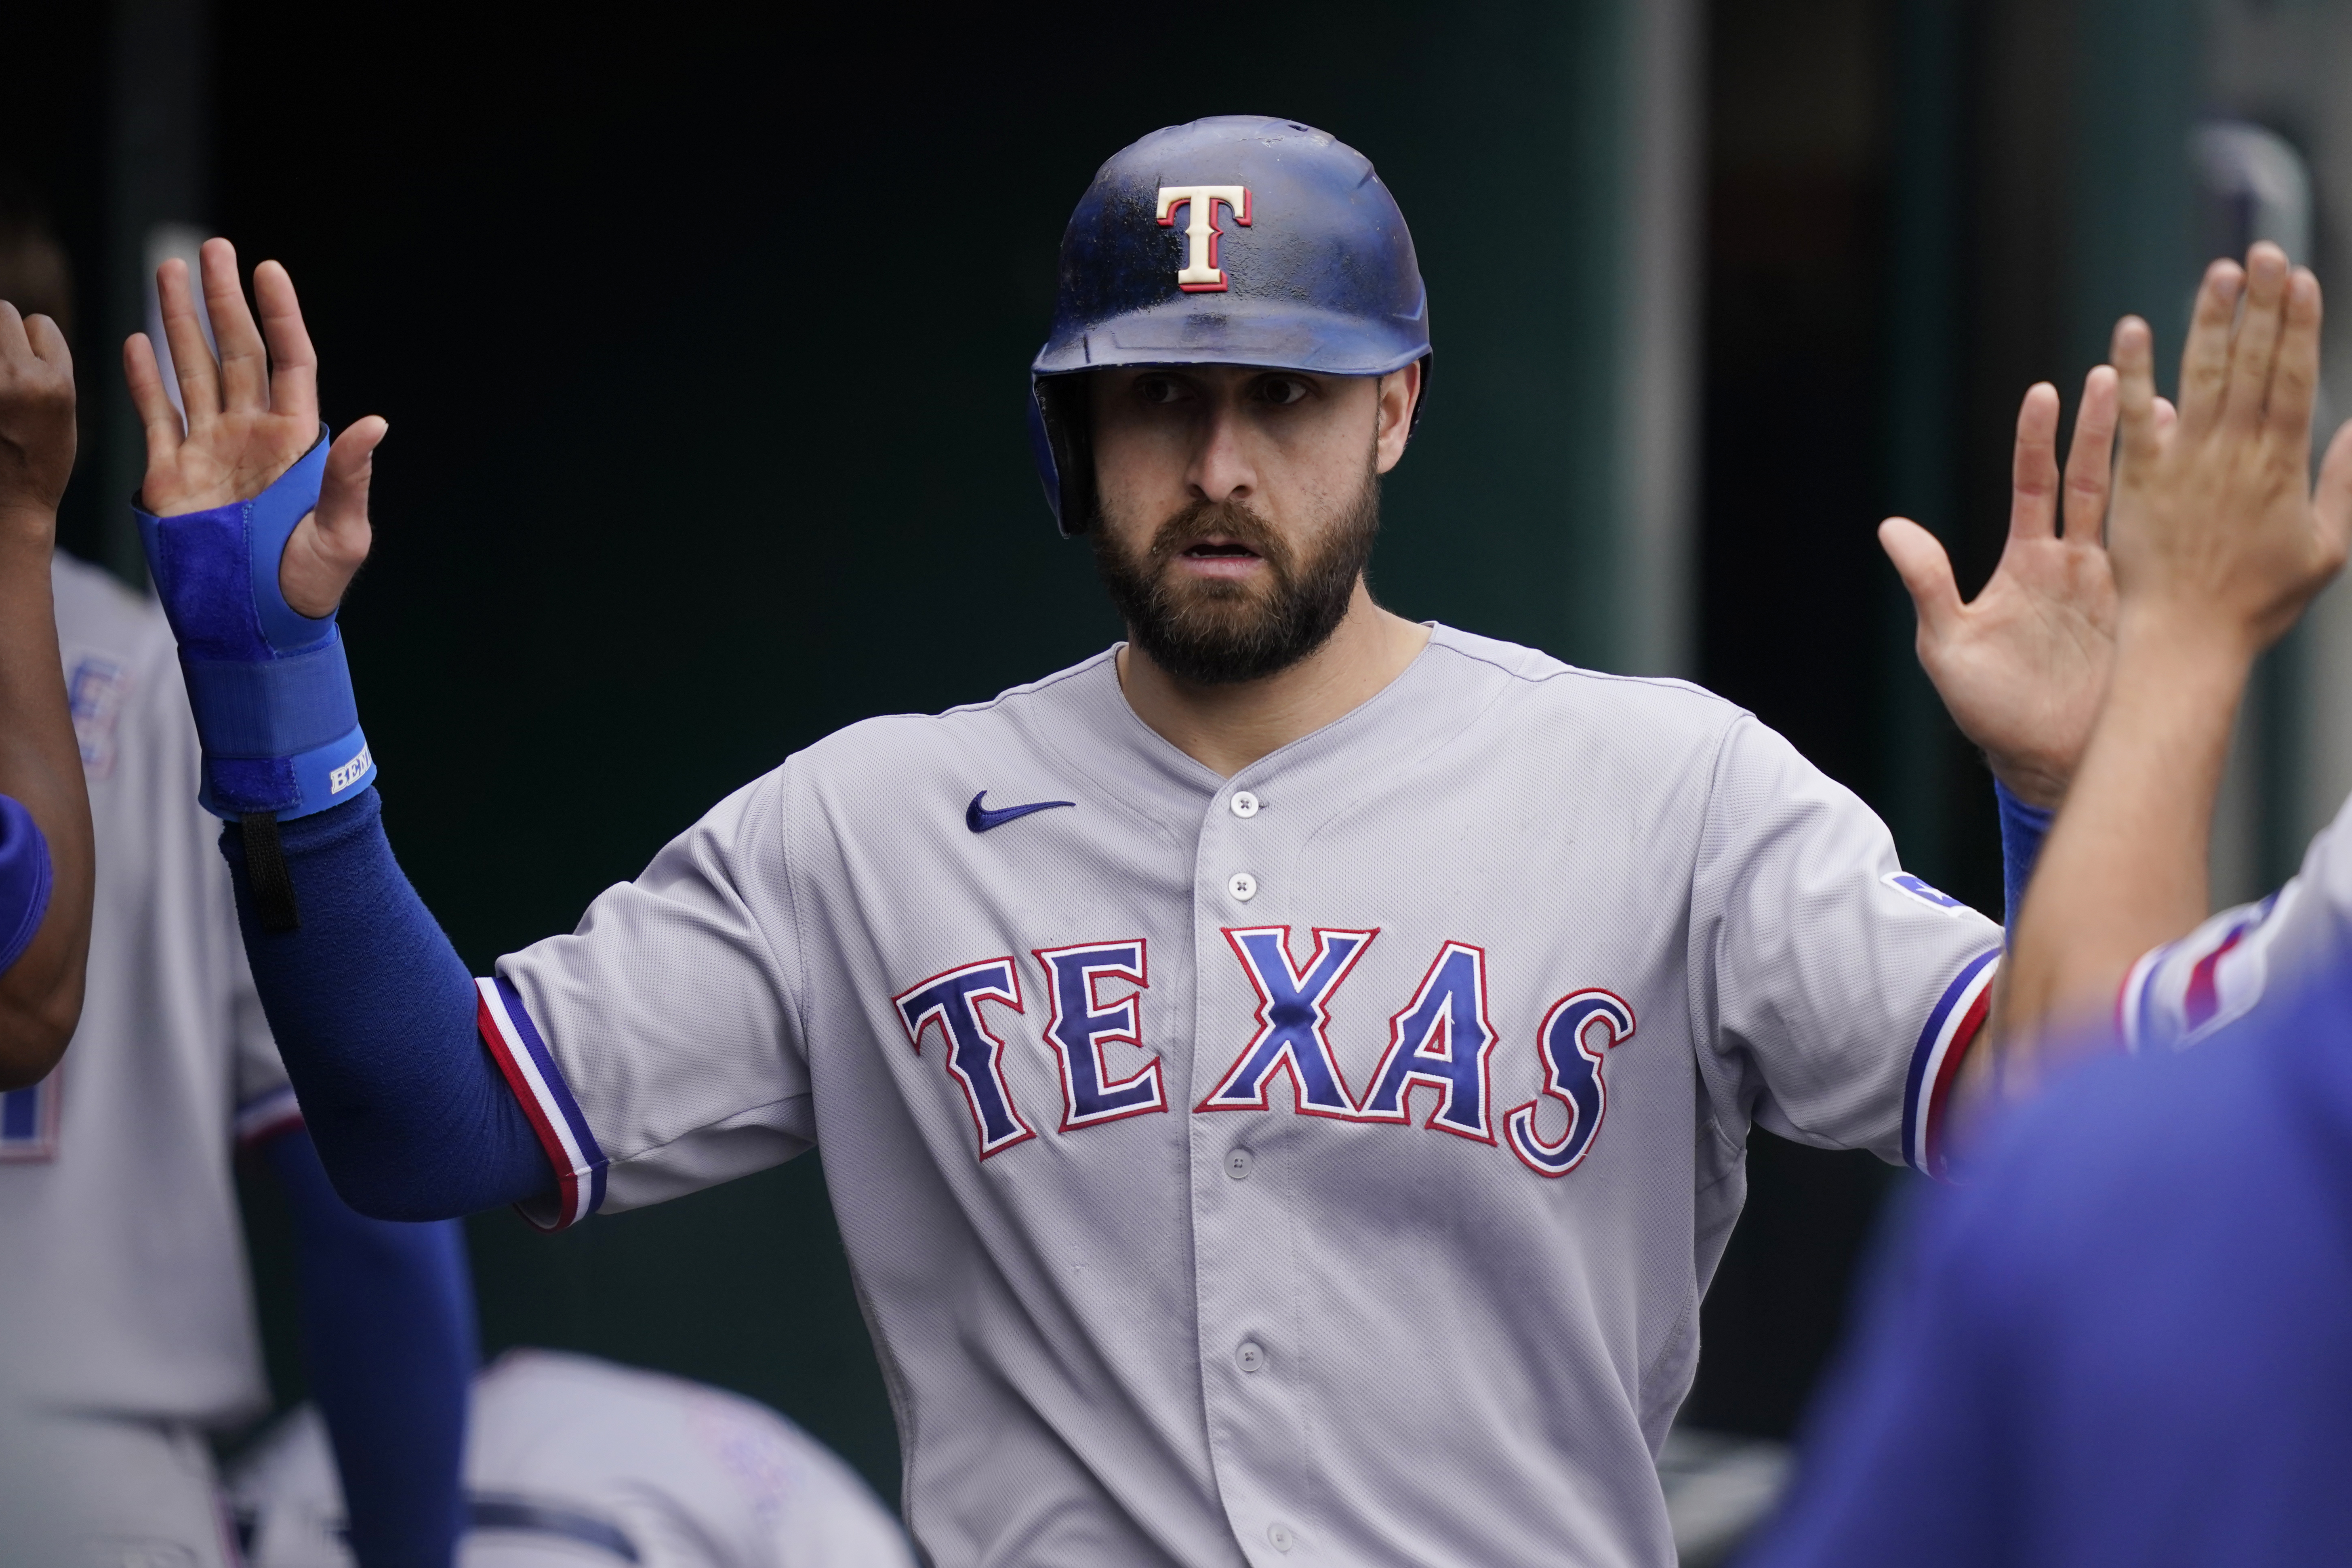 Just Have To Go Out There And Kinda Play My Game - Joey Gallo